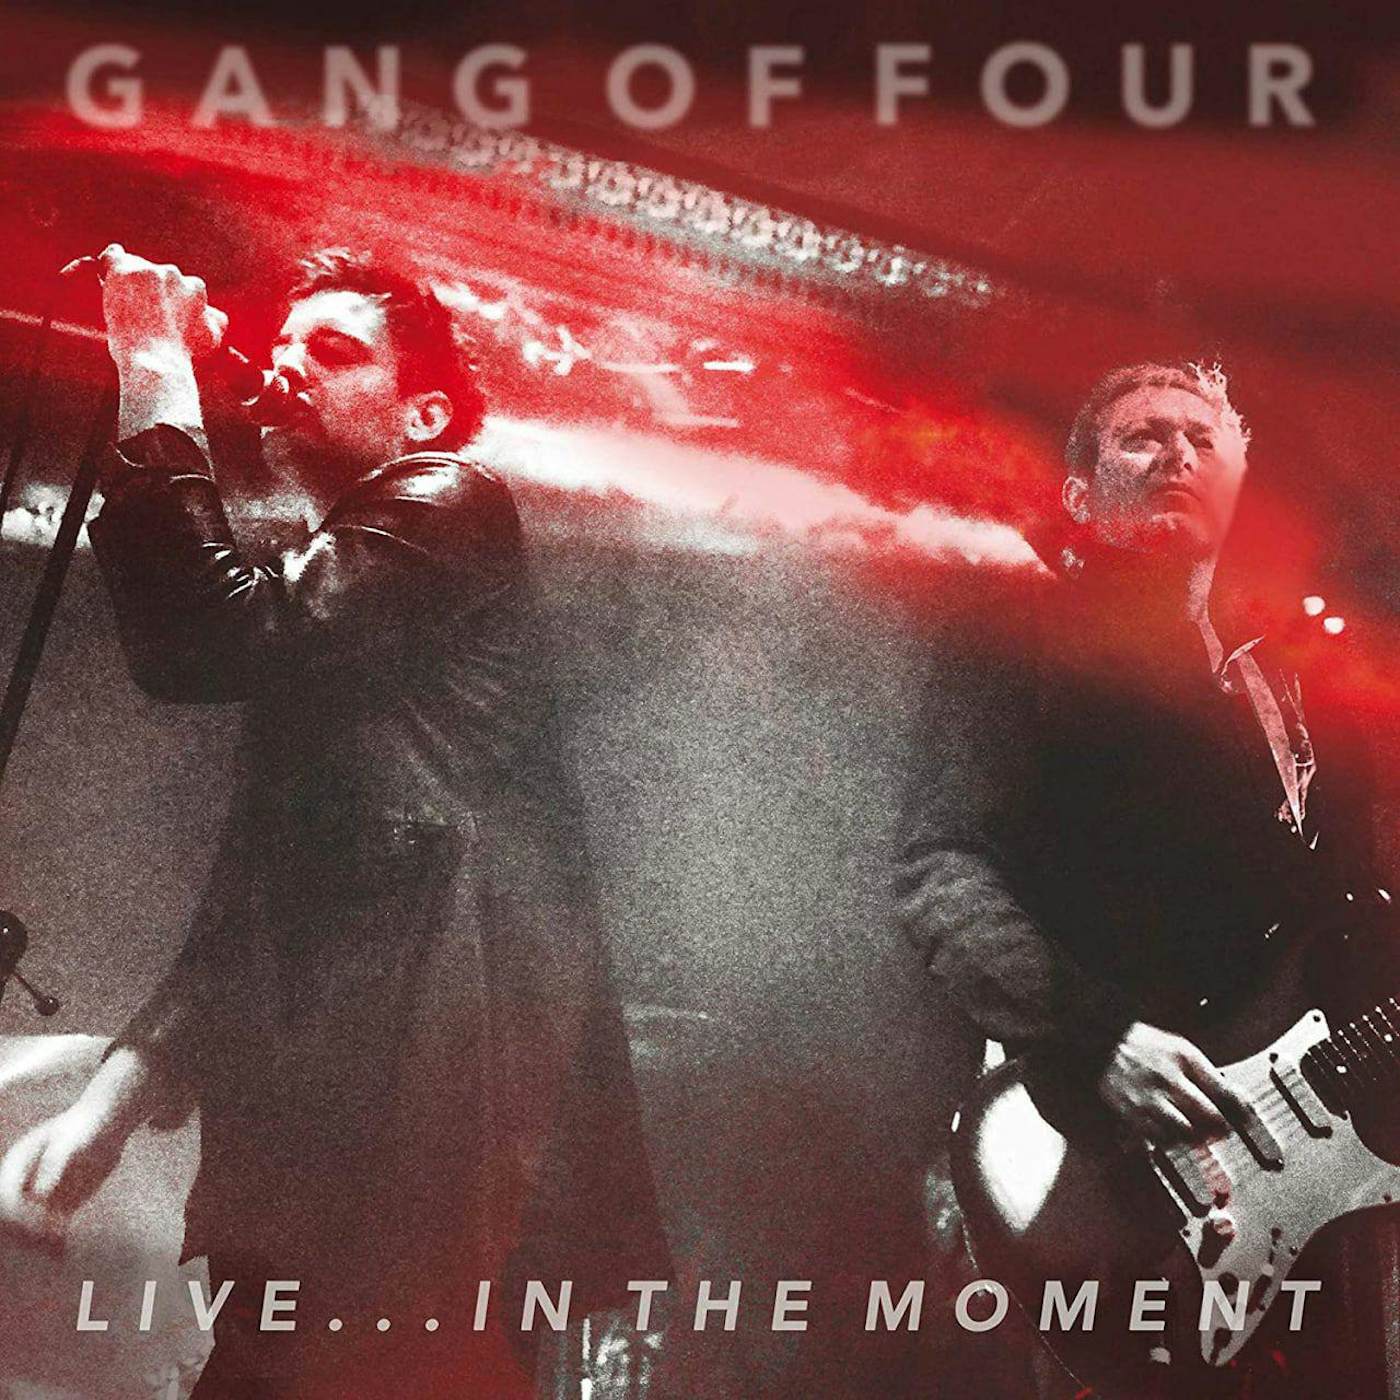 Gang Of Four LIVE IN THE MOMENT (DL CARD) Vinyl Record